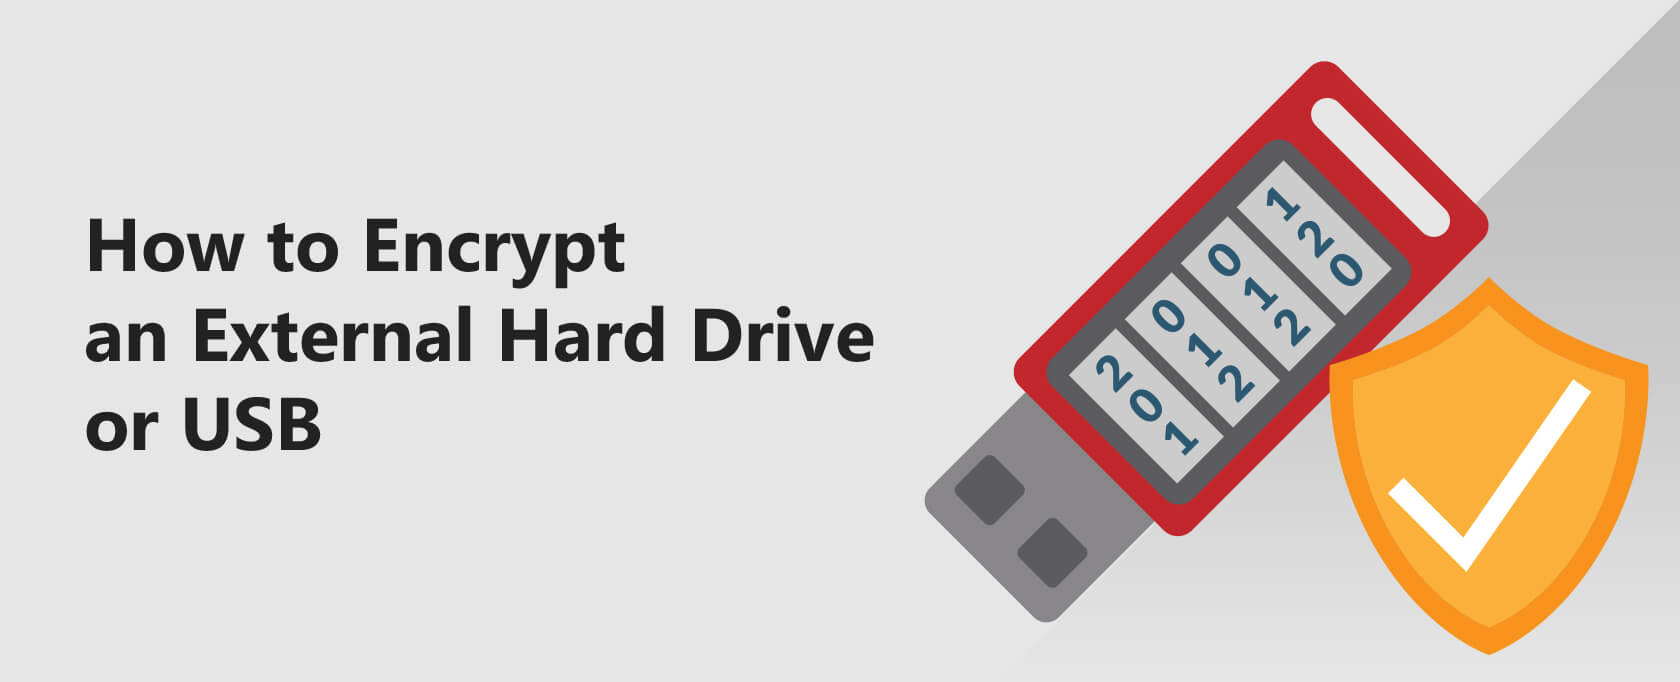 How to Encrypt External Hard Drive or Flash Drive